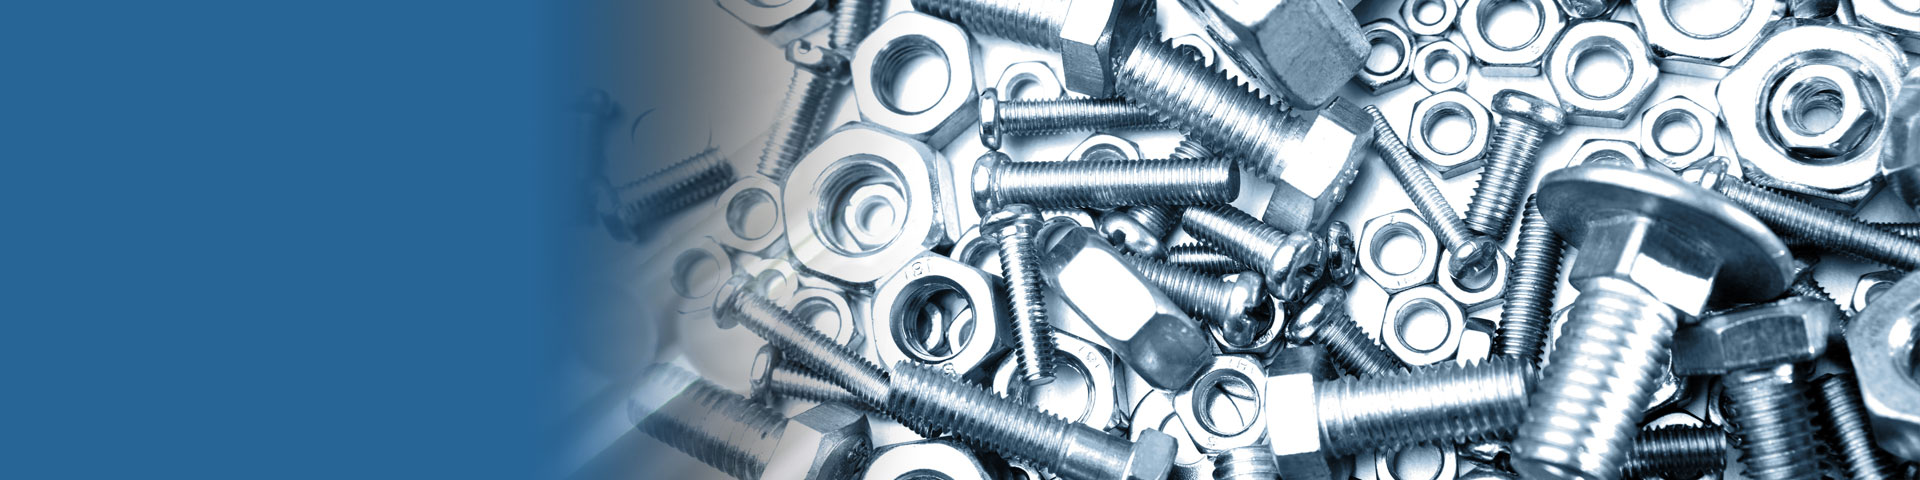 321 Stainless Steel Fasteners